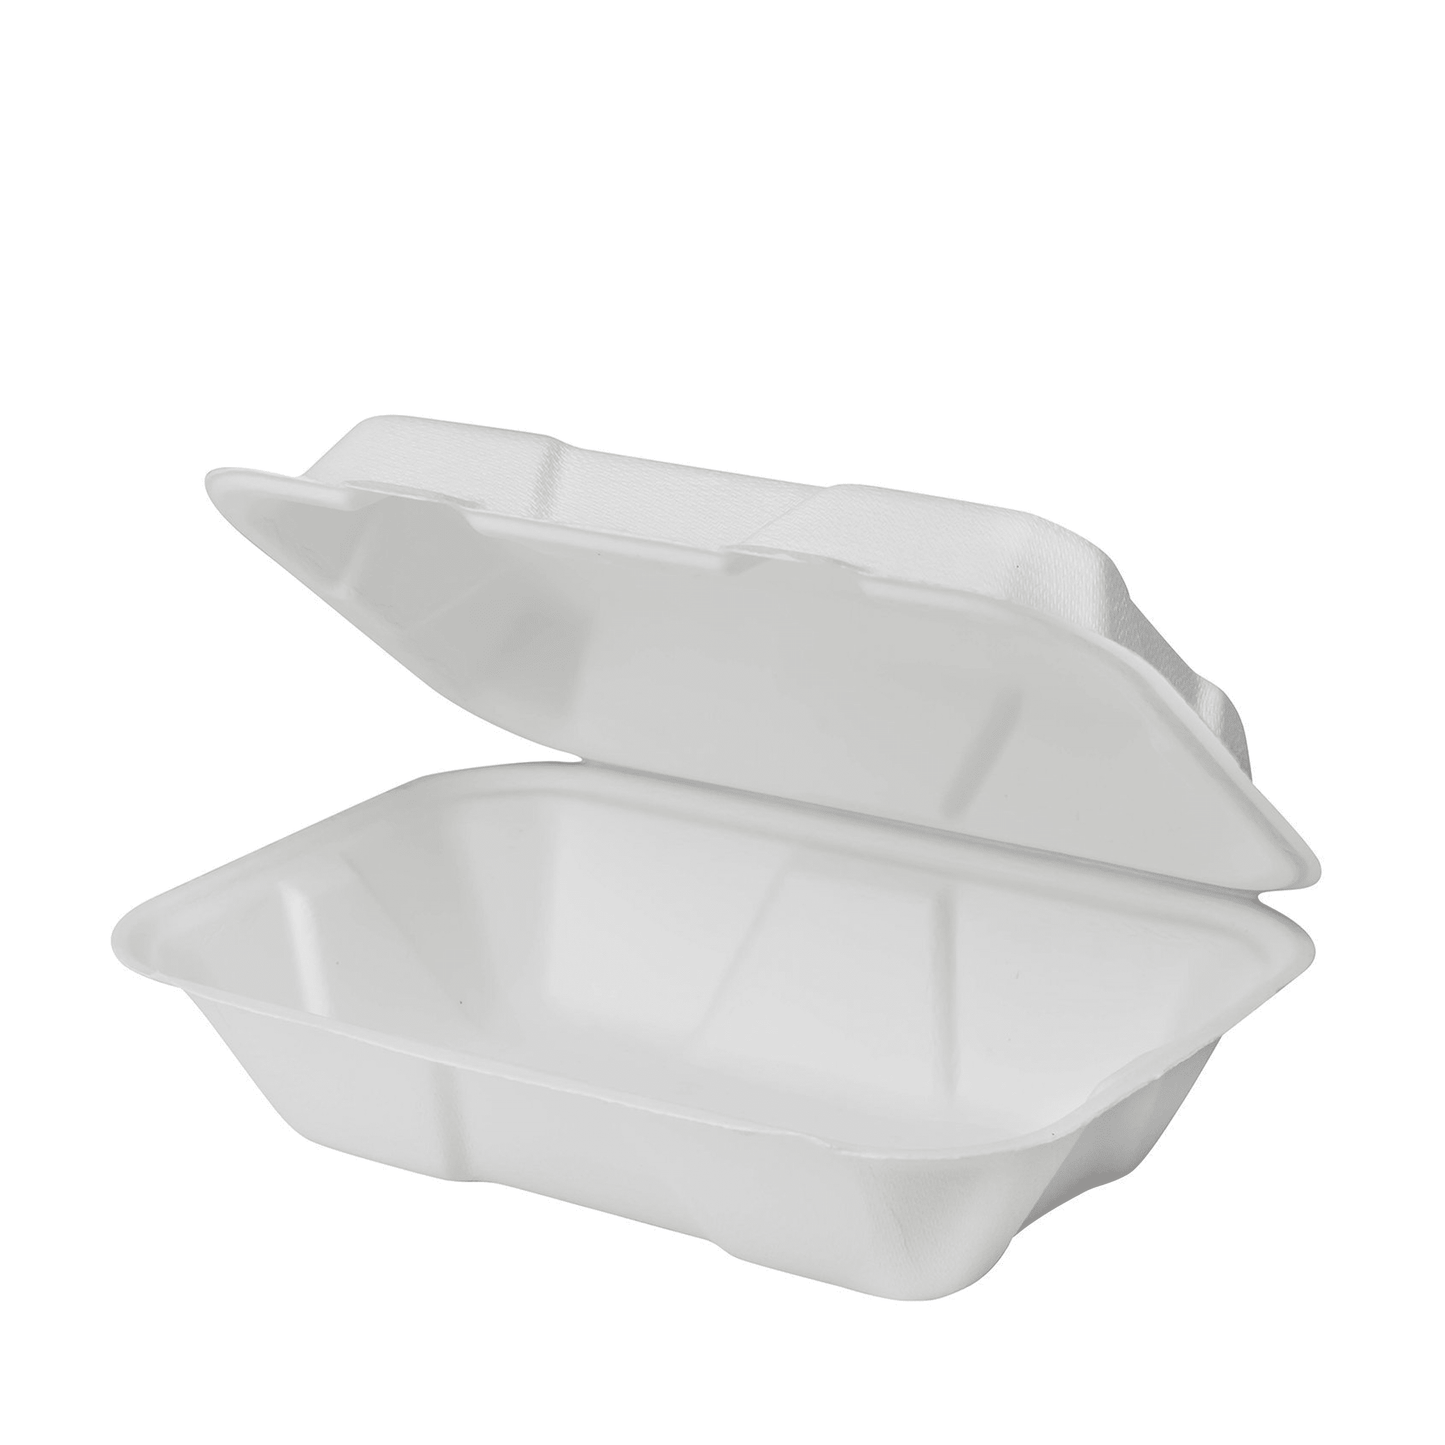 Extra Large Biodegradable Take Out Boxes - Karat 9x9 Bagasse Container